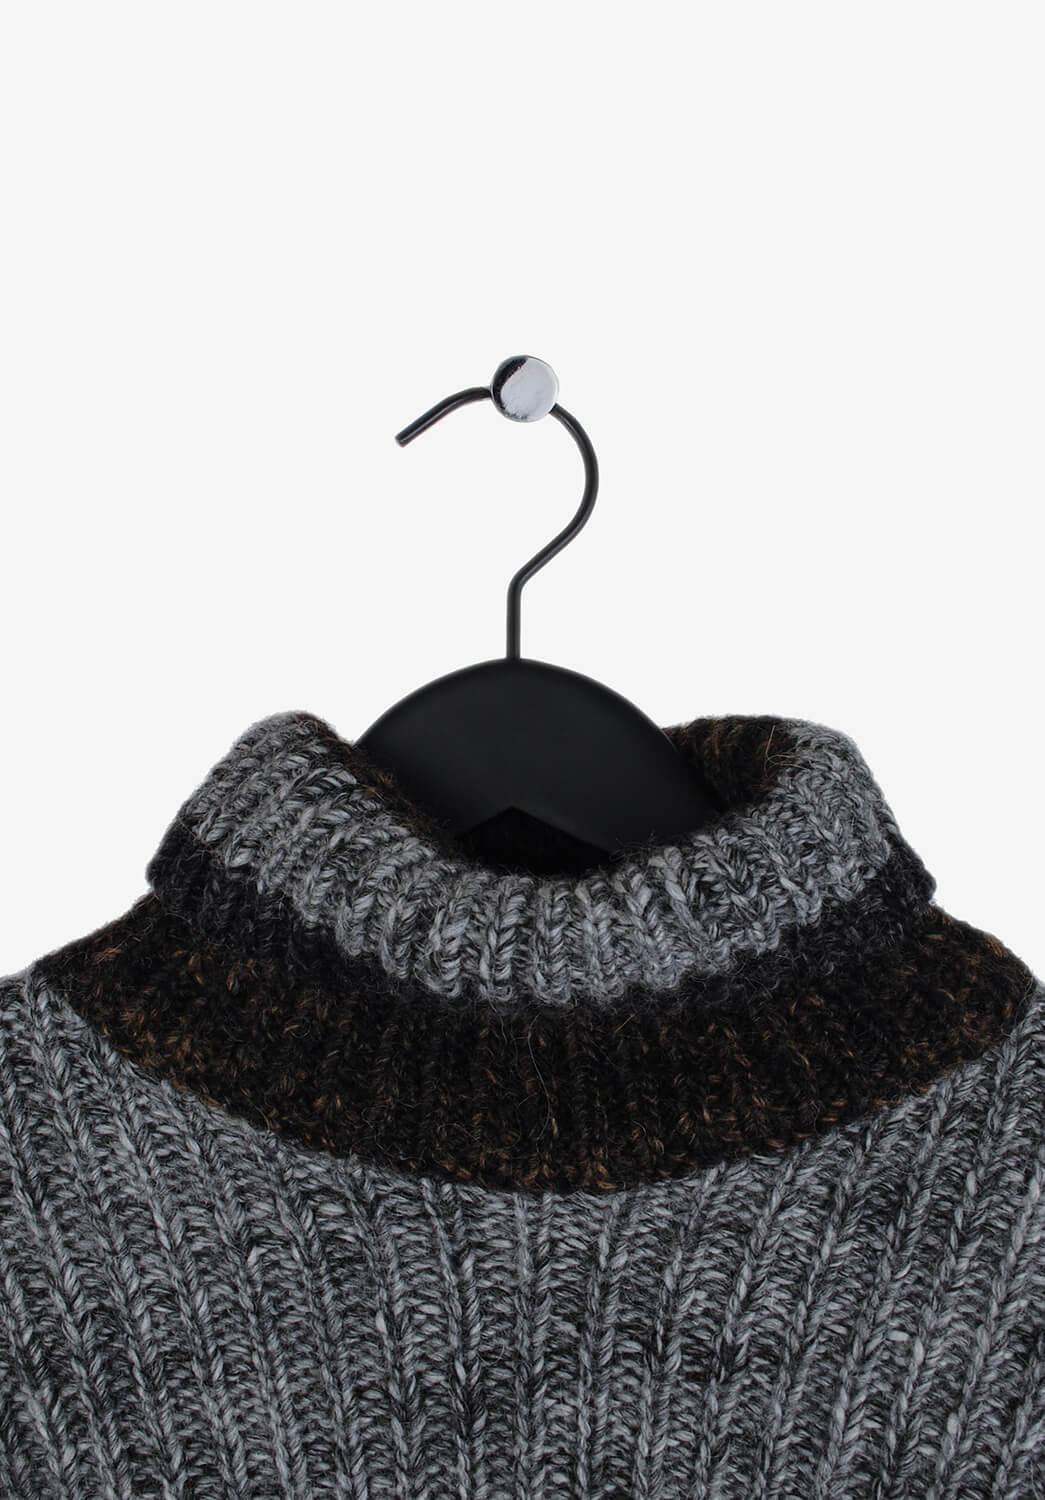 Item for sale is 100% genuine Dolce&Gabbana Turtle Neck Warm Sweater
Color: Brown/Grey
(An actual color may a bit vary due to individual computer screen interpretation)
Material: 50% wool, 40% acrylic, 10% alpaca
Tag size: 50IT(M)
This sweater is